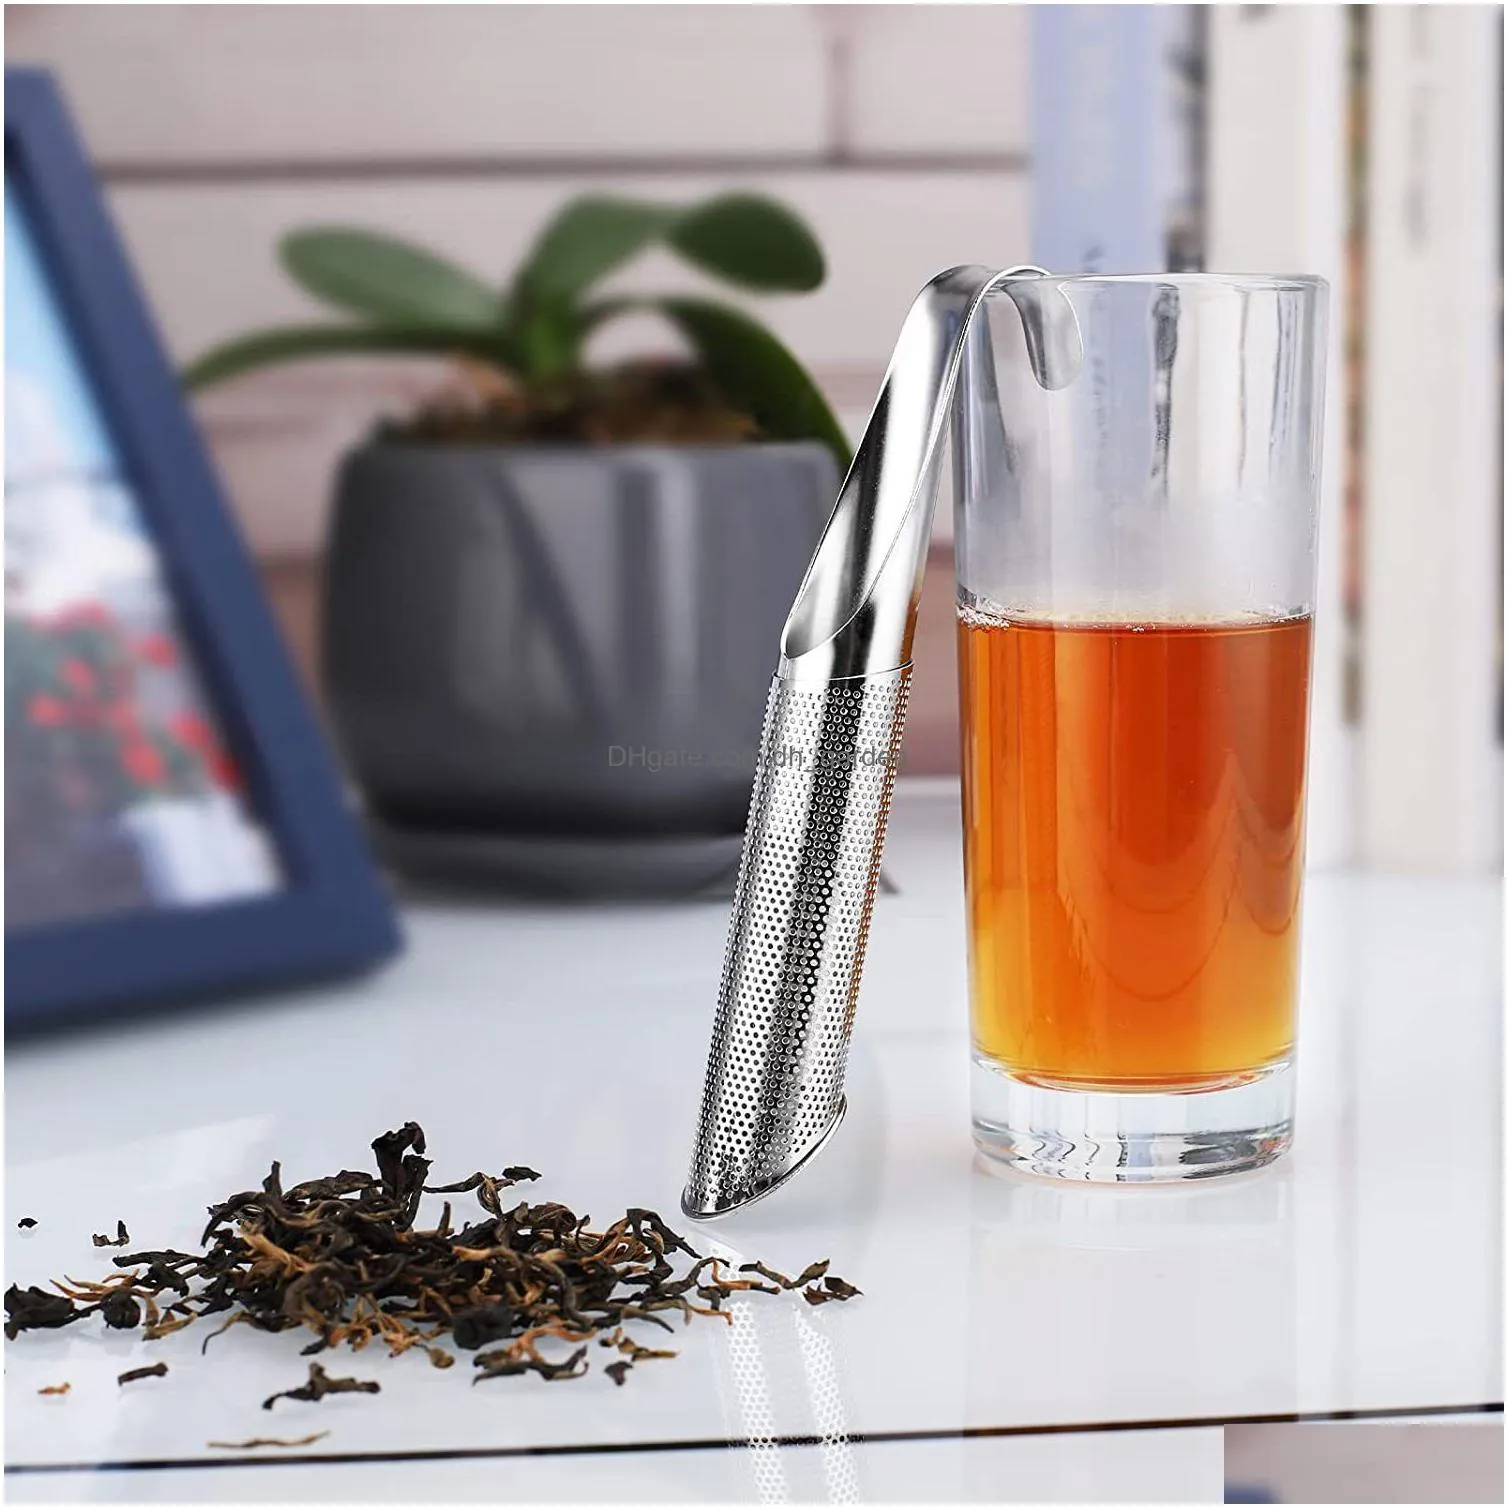 stainless steel tea strainers pipe teas infuser hanging style home coffee vanilla spice filter diffuser kitchen accessories